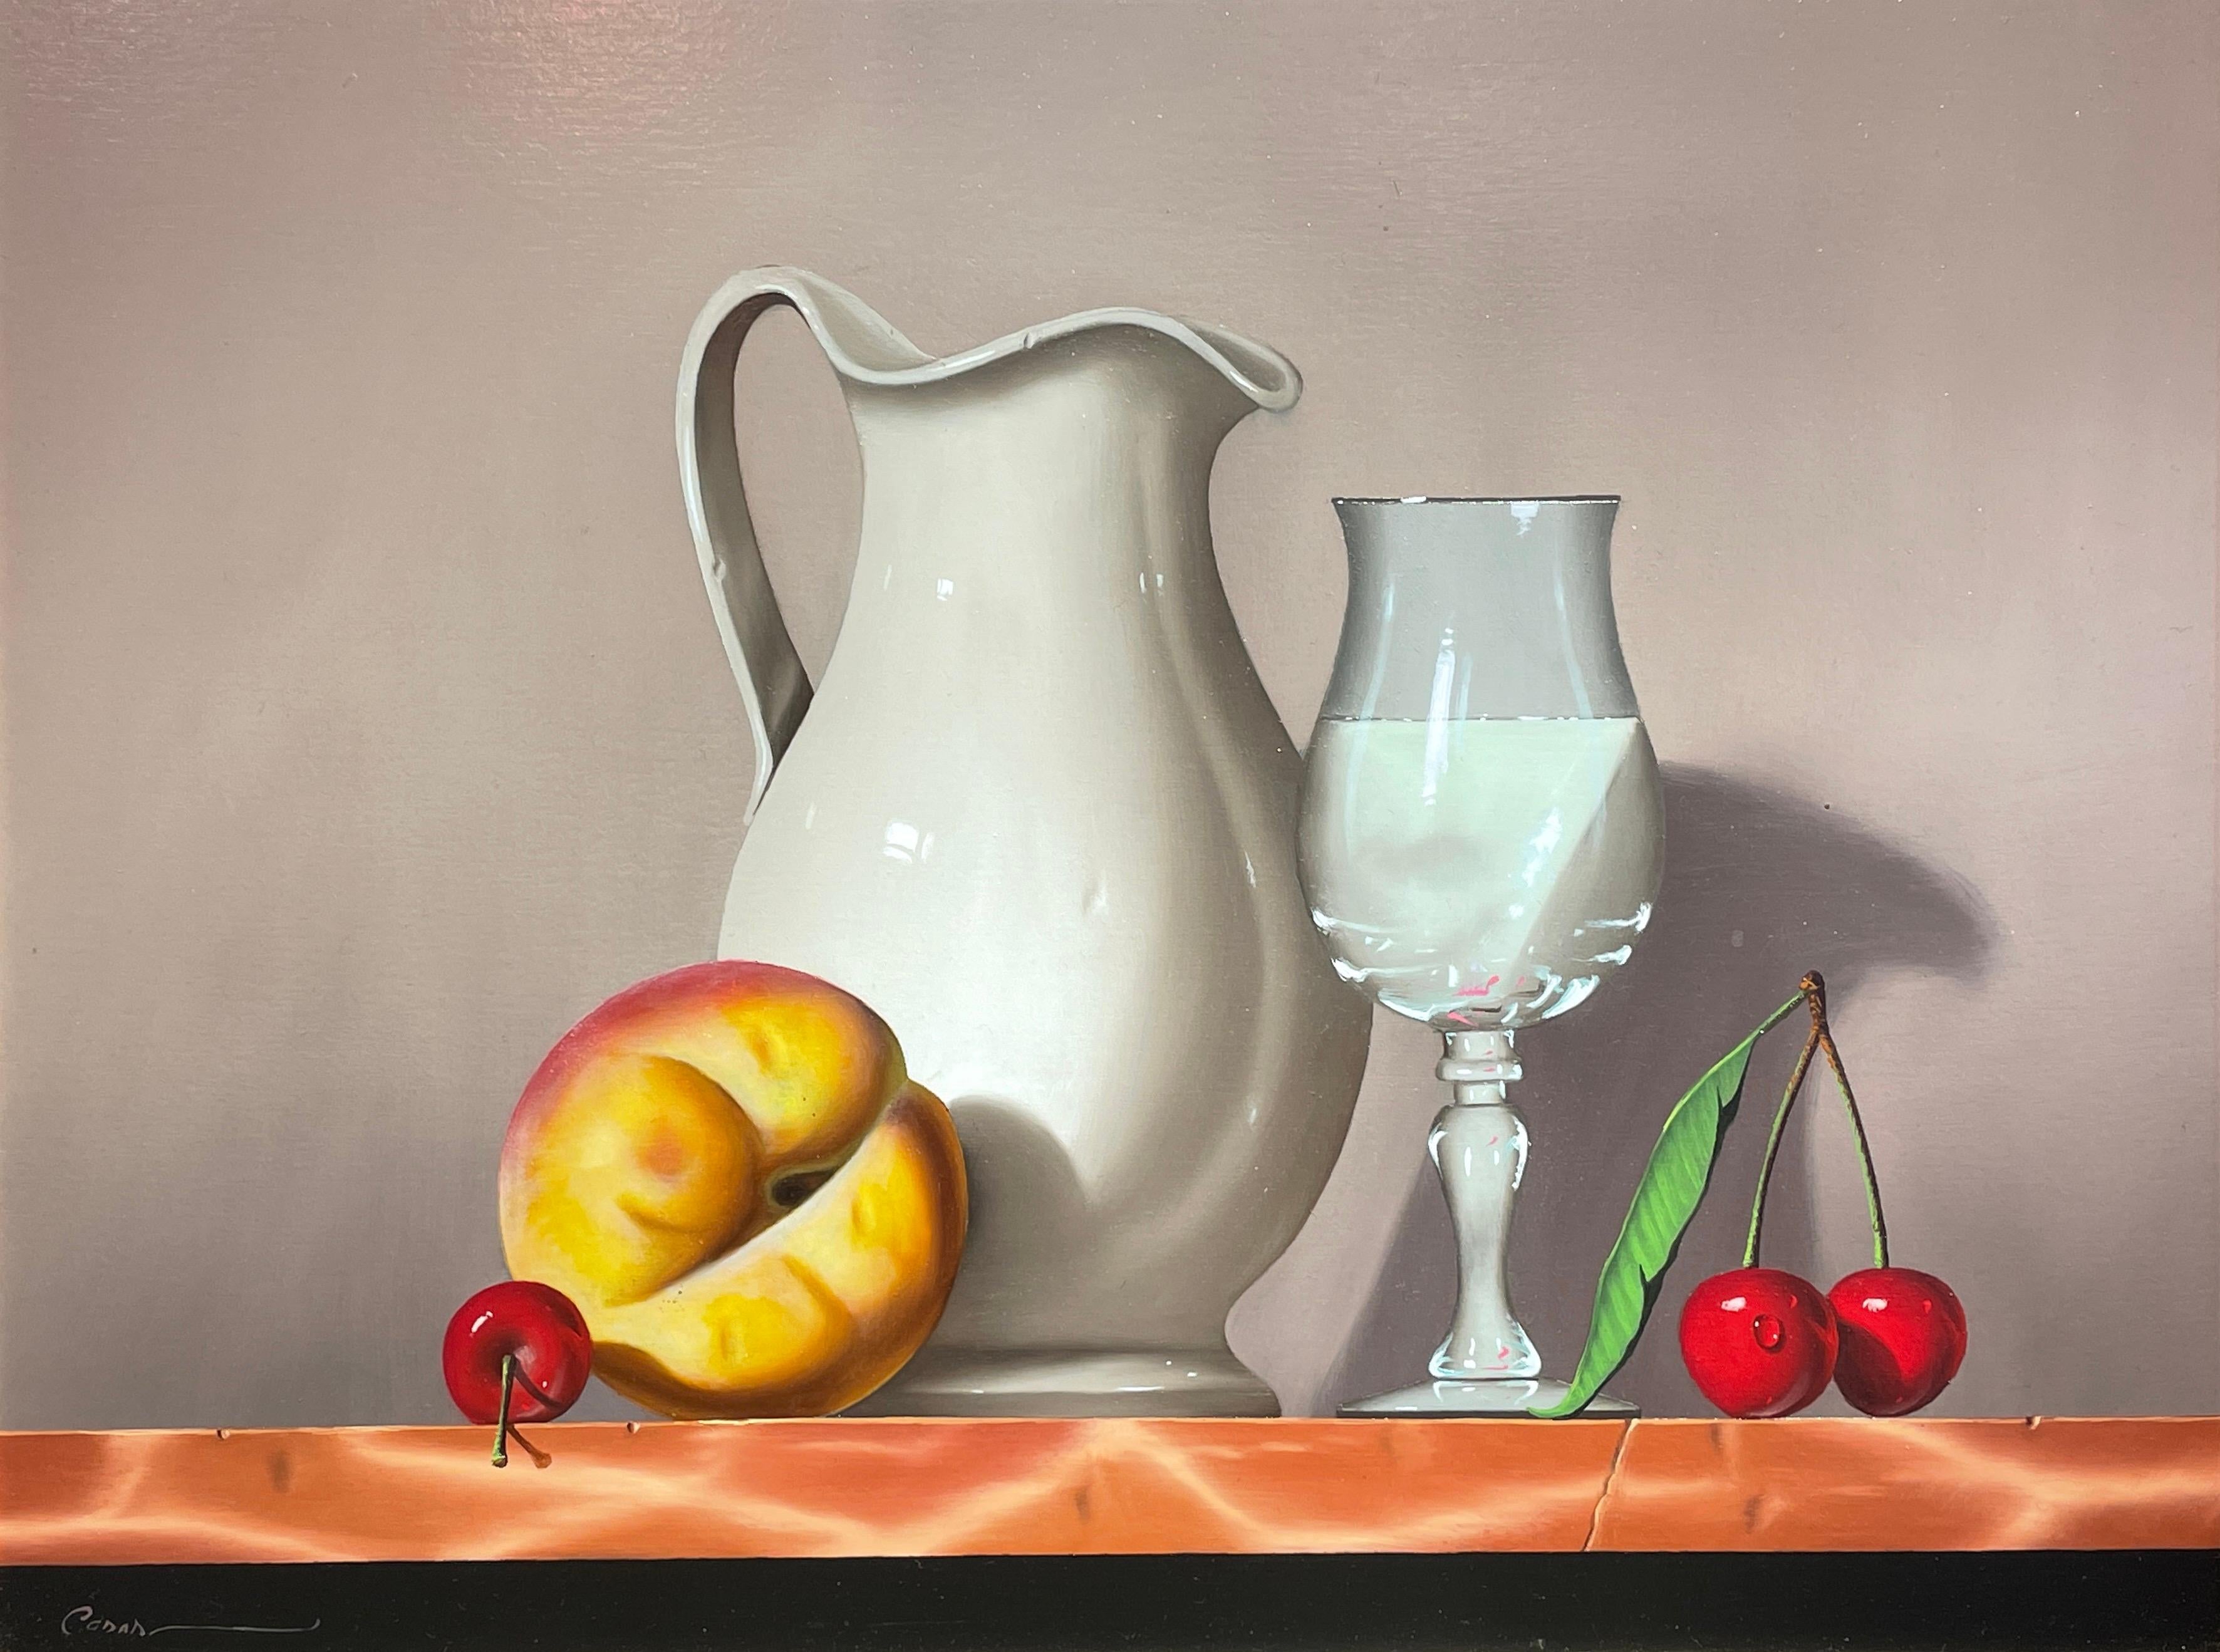 Casas Still-Life Painting - 'Glass Half Full' Contemporary Still Life painting with Peach, Cherries and jug